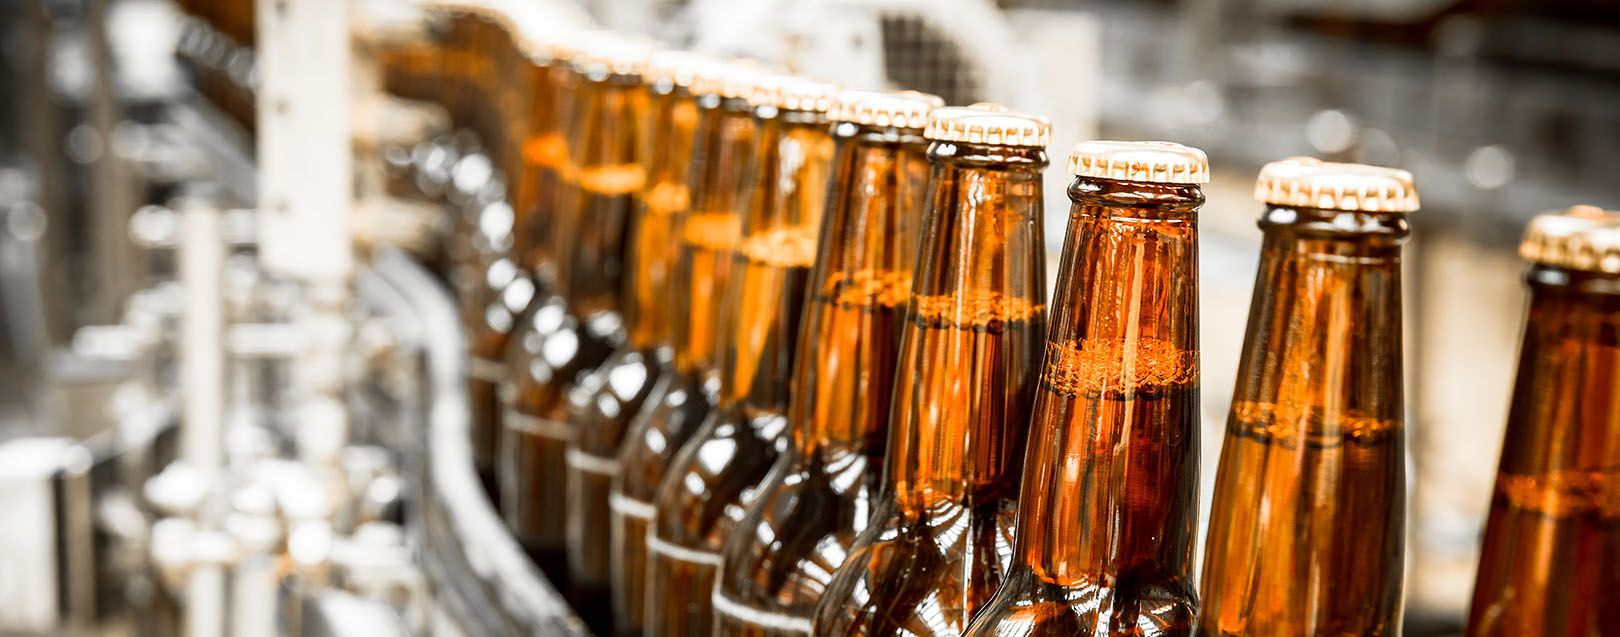 Beer industry to grow at 7.5% between 2017 and 2021